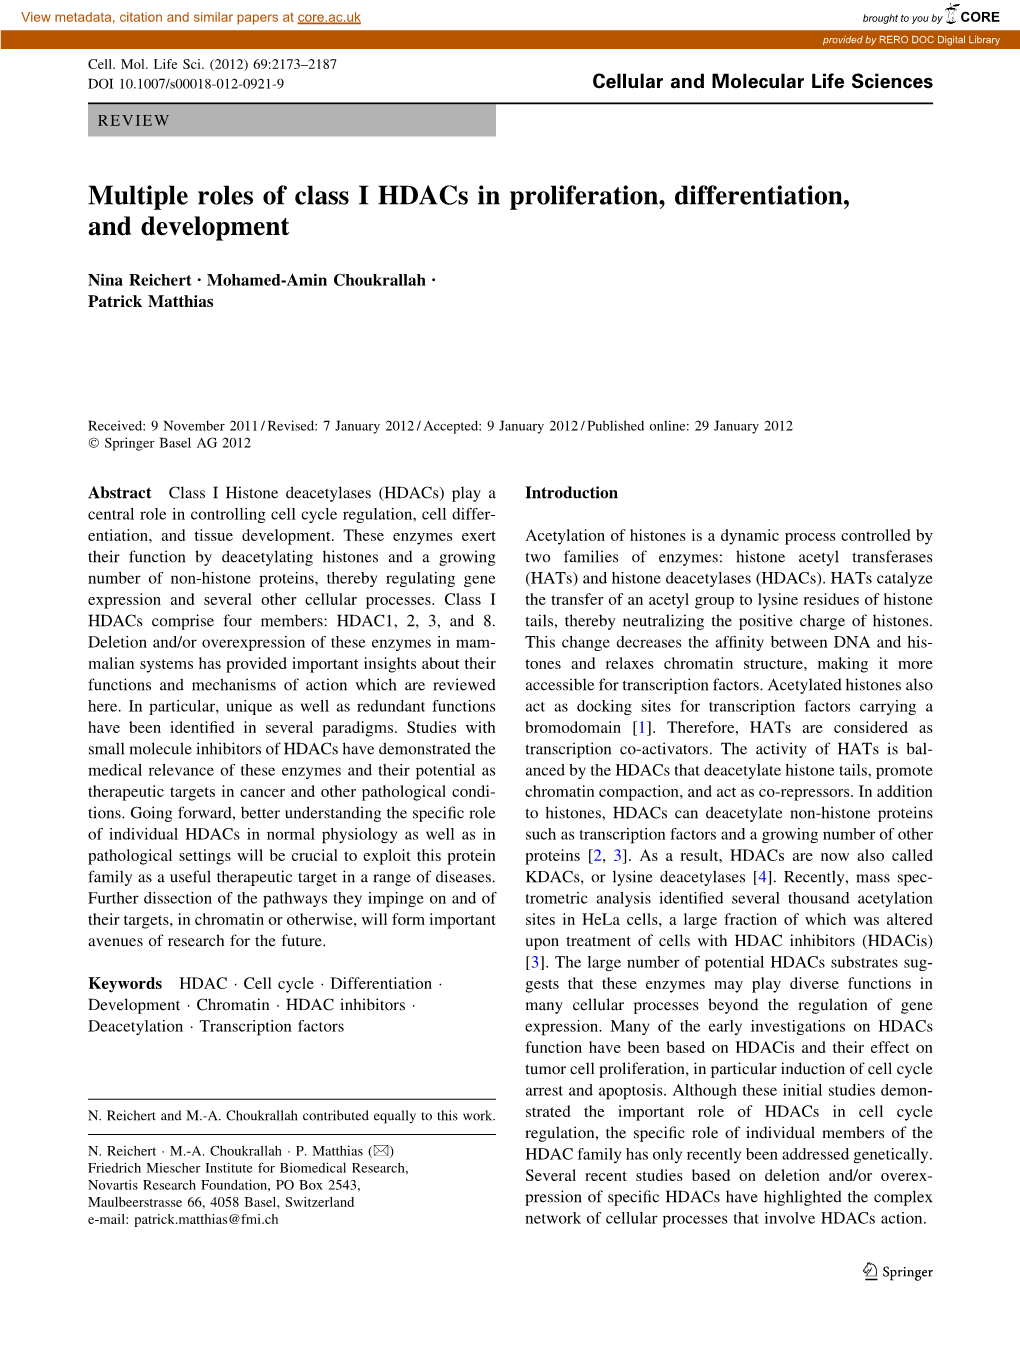 Multiple Roles of Class I Hdacs in Proliferation, Differentiation, and Development